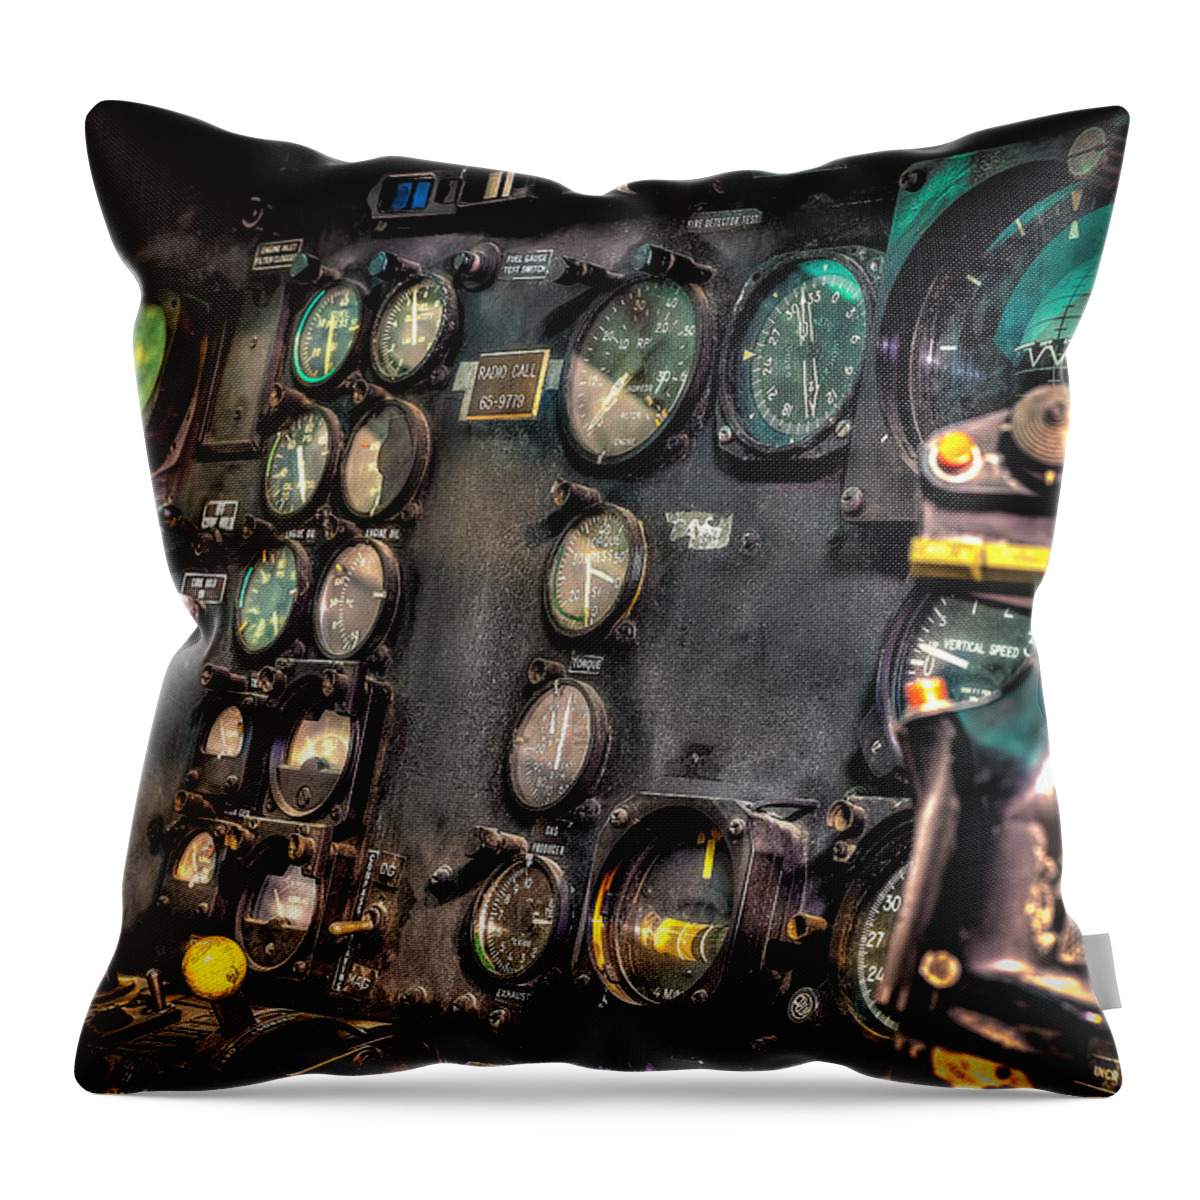 Huey Instrument Panel Throw Pillow featuring the photograph Huey Instrument Panel by David Morefield